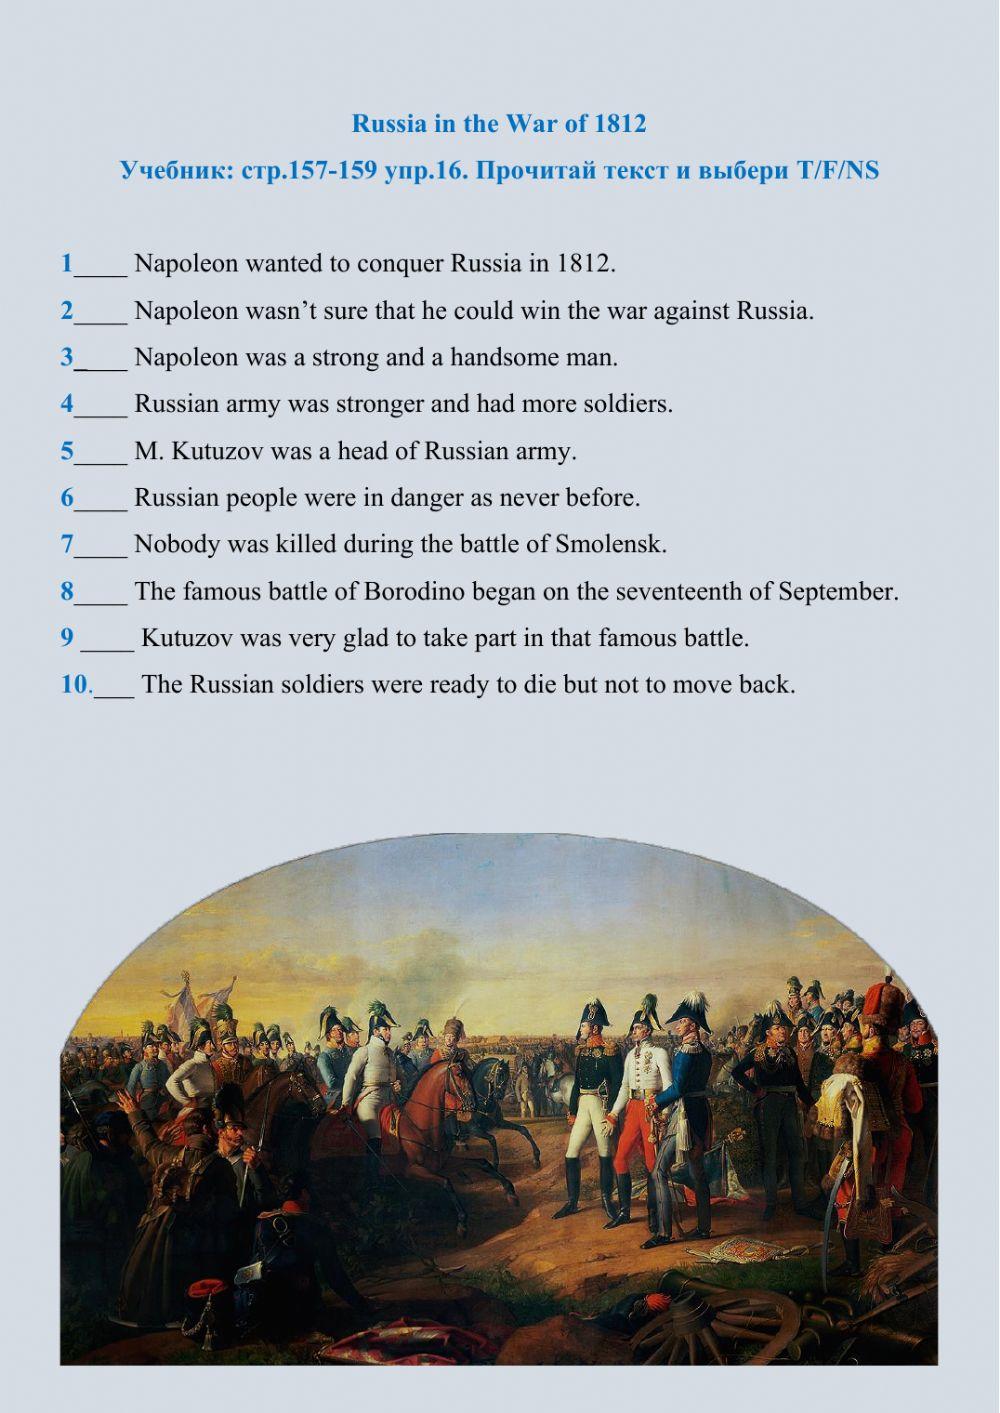 Form 4. Russia in the War of 1812